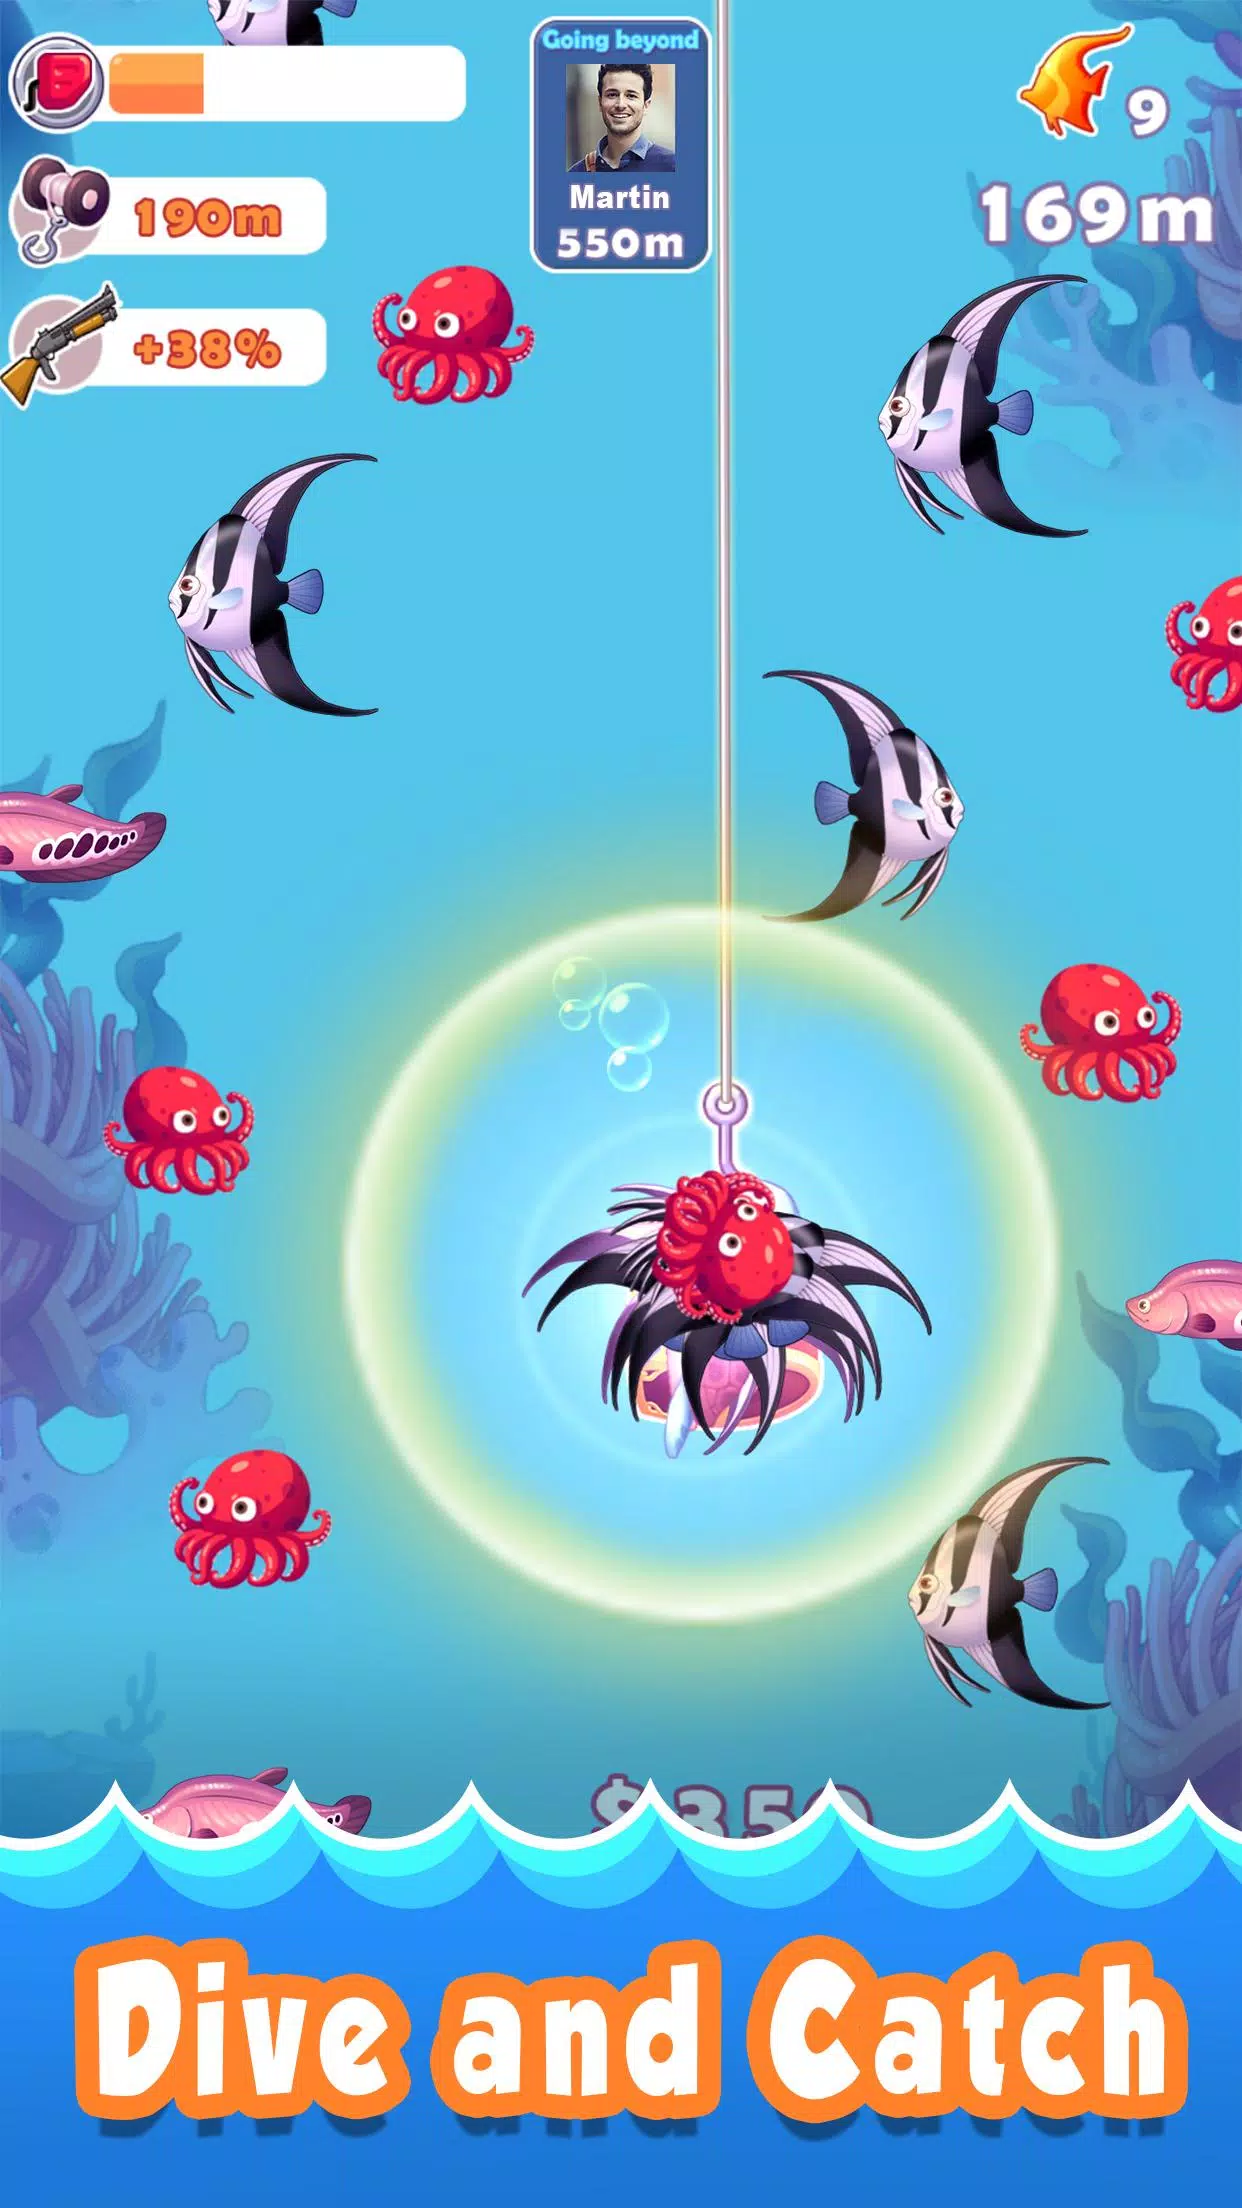 Fish Smasher Apk Download for Android- Latest version 1.1.0- com.funnygame .fishsmasher